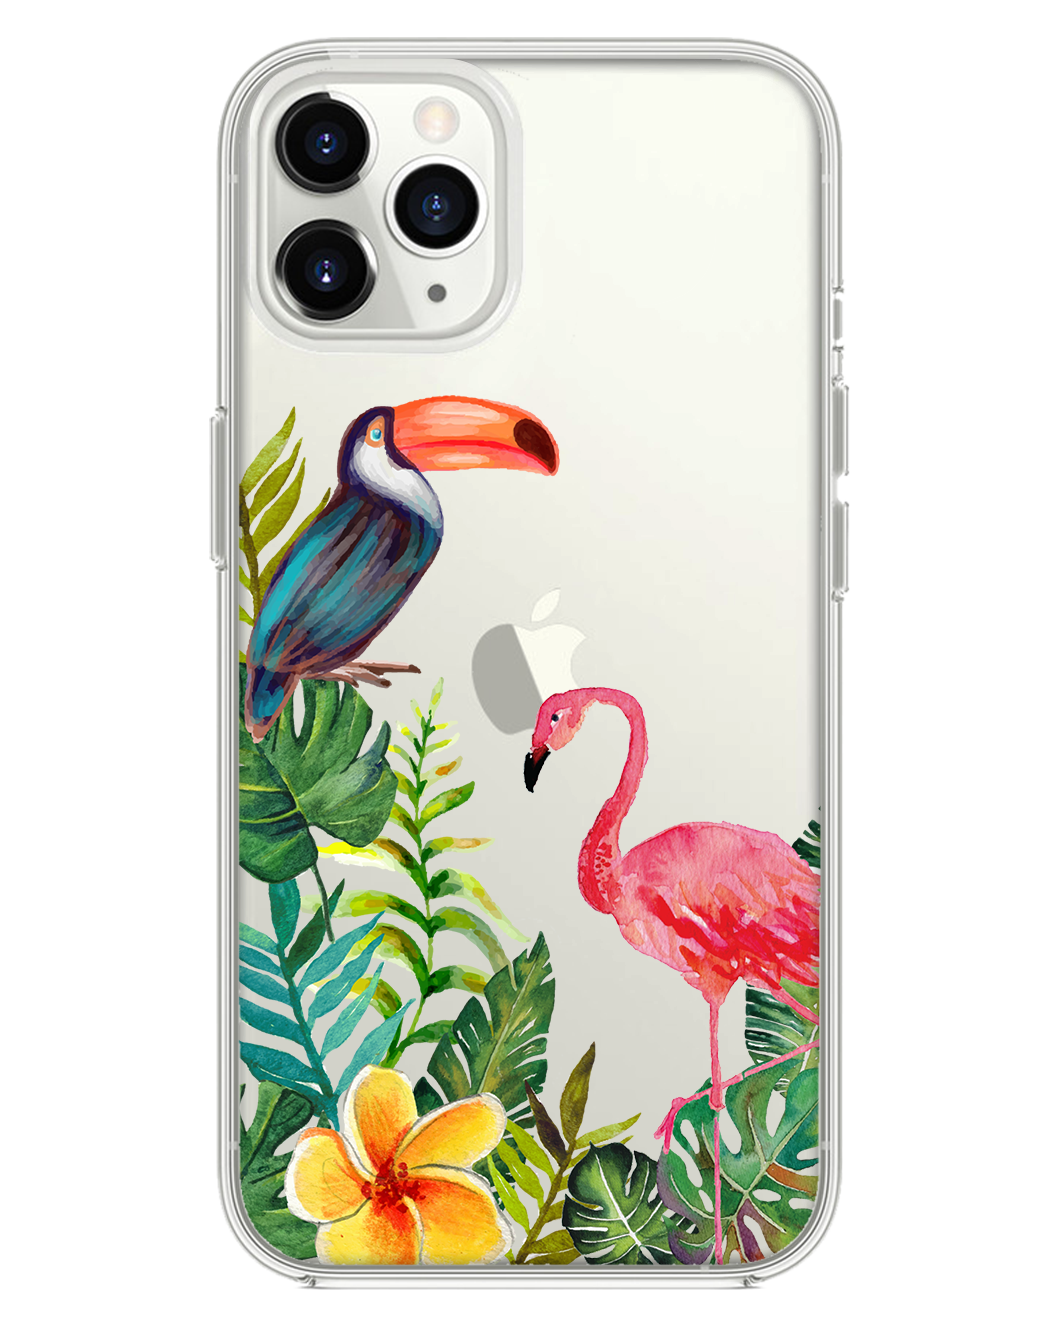 iPhone Rearguard Hybrid - Tropical